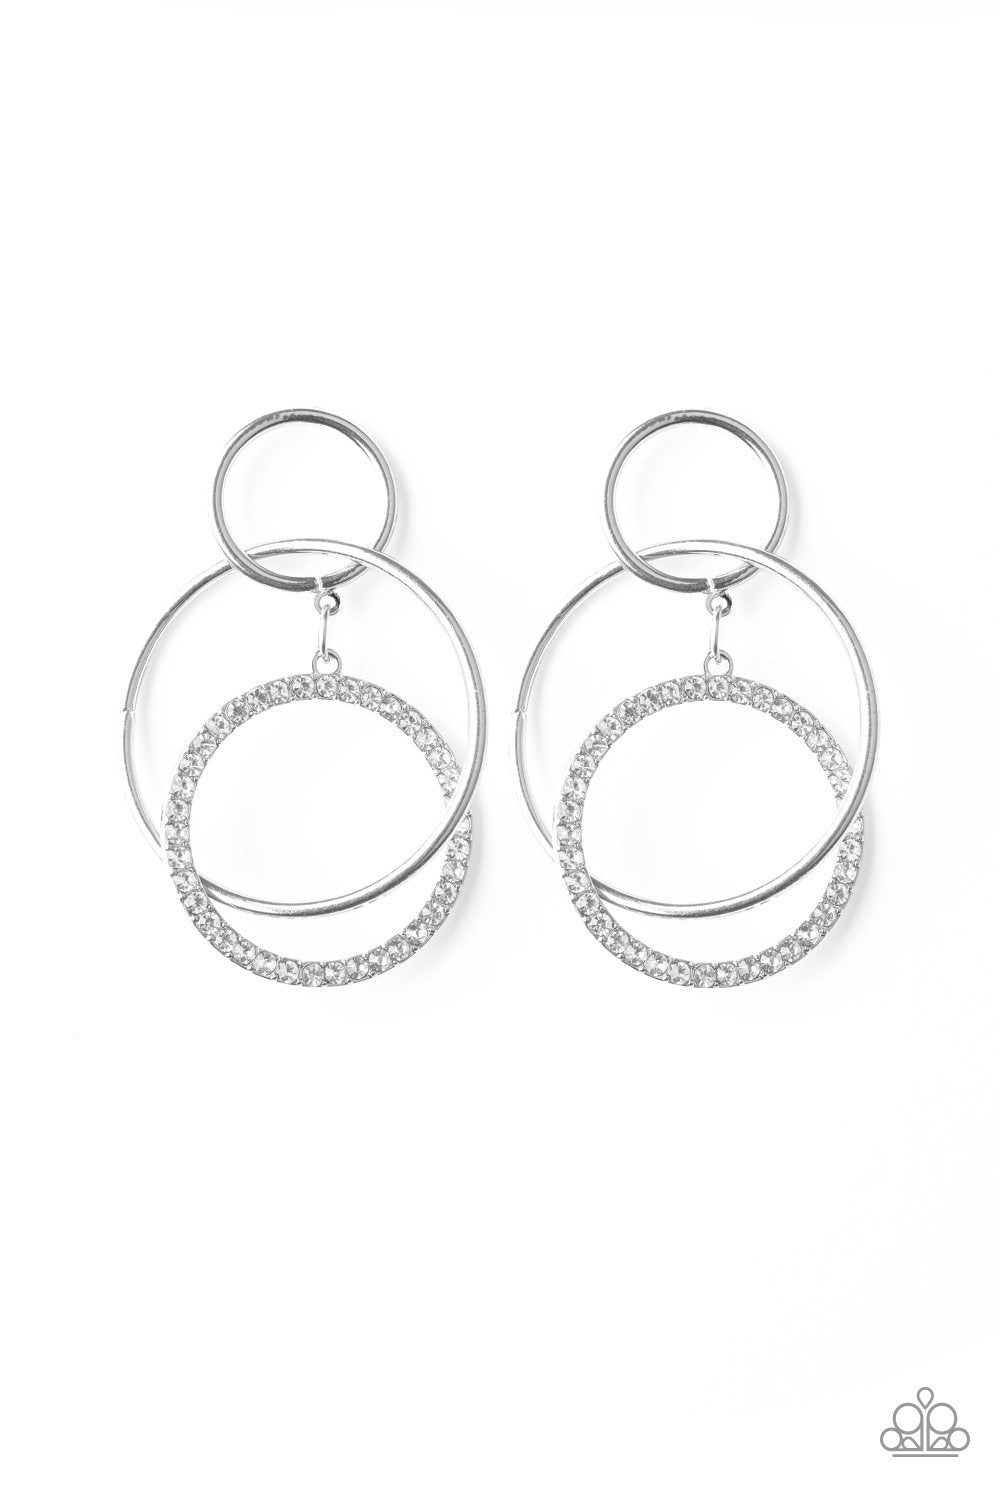 Metro Bliss Silver and White Rhinestone Earrings - Paparazzi Accessories-CarasShop.com - $5 Jewelry by Cara Jewels